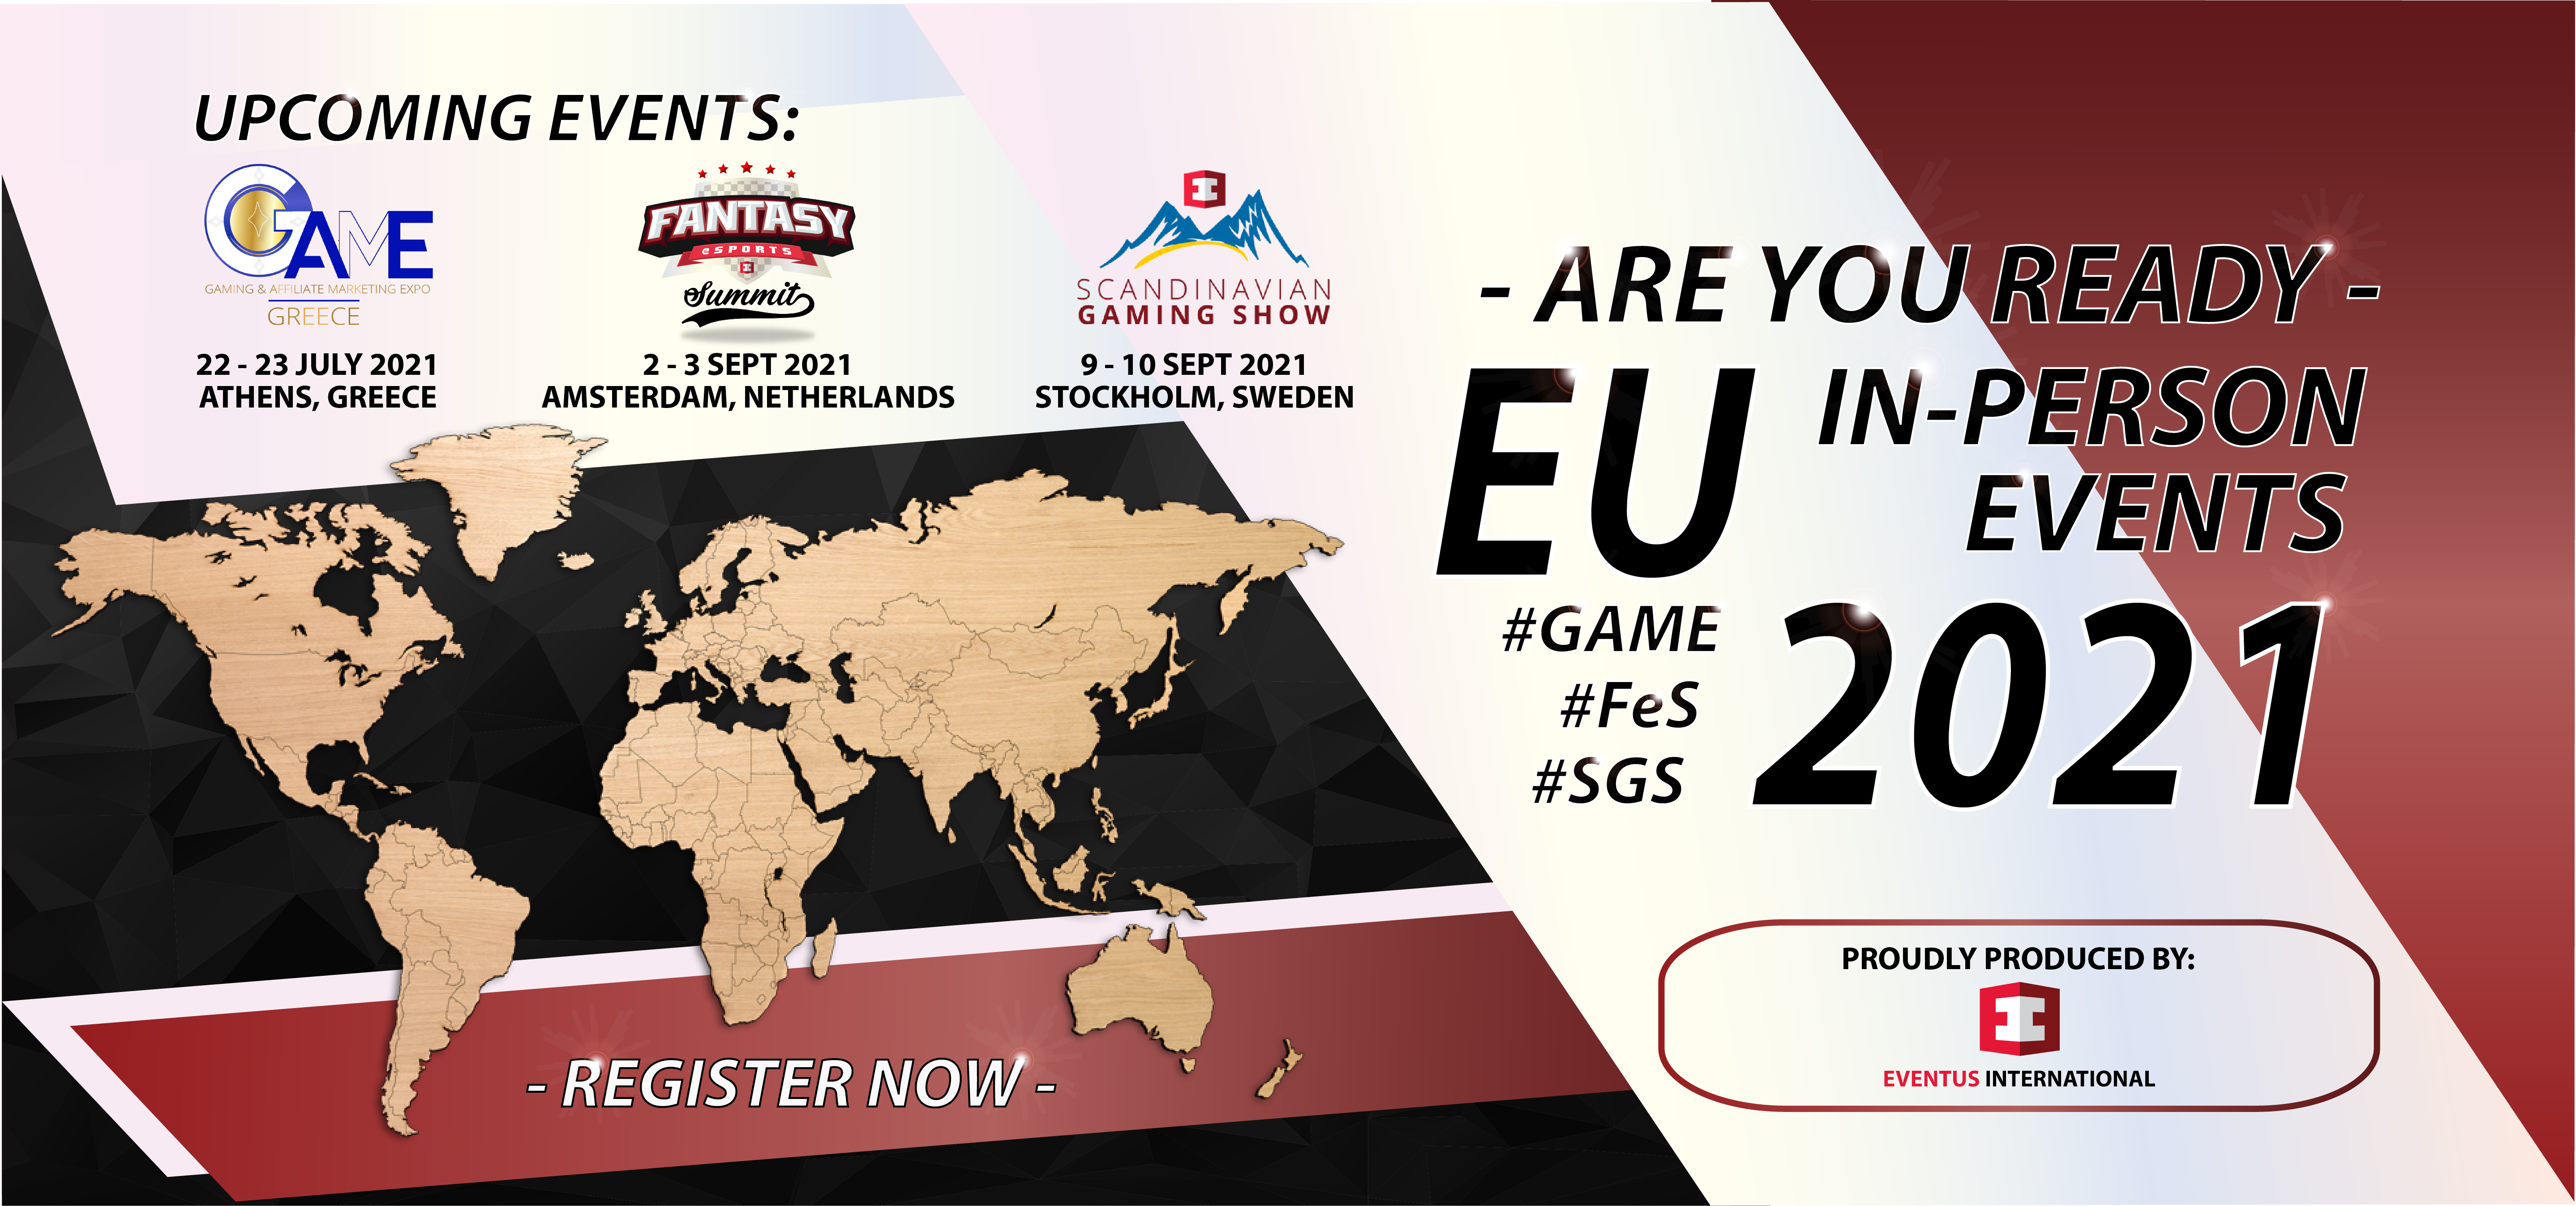 Are You Ready Europe – Join Eventus International in Greece, Netherlands & Sweden